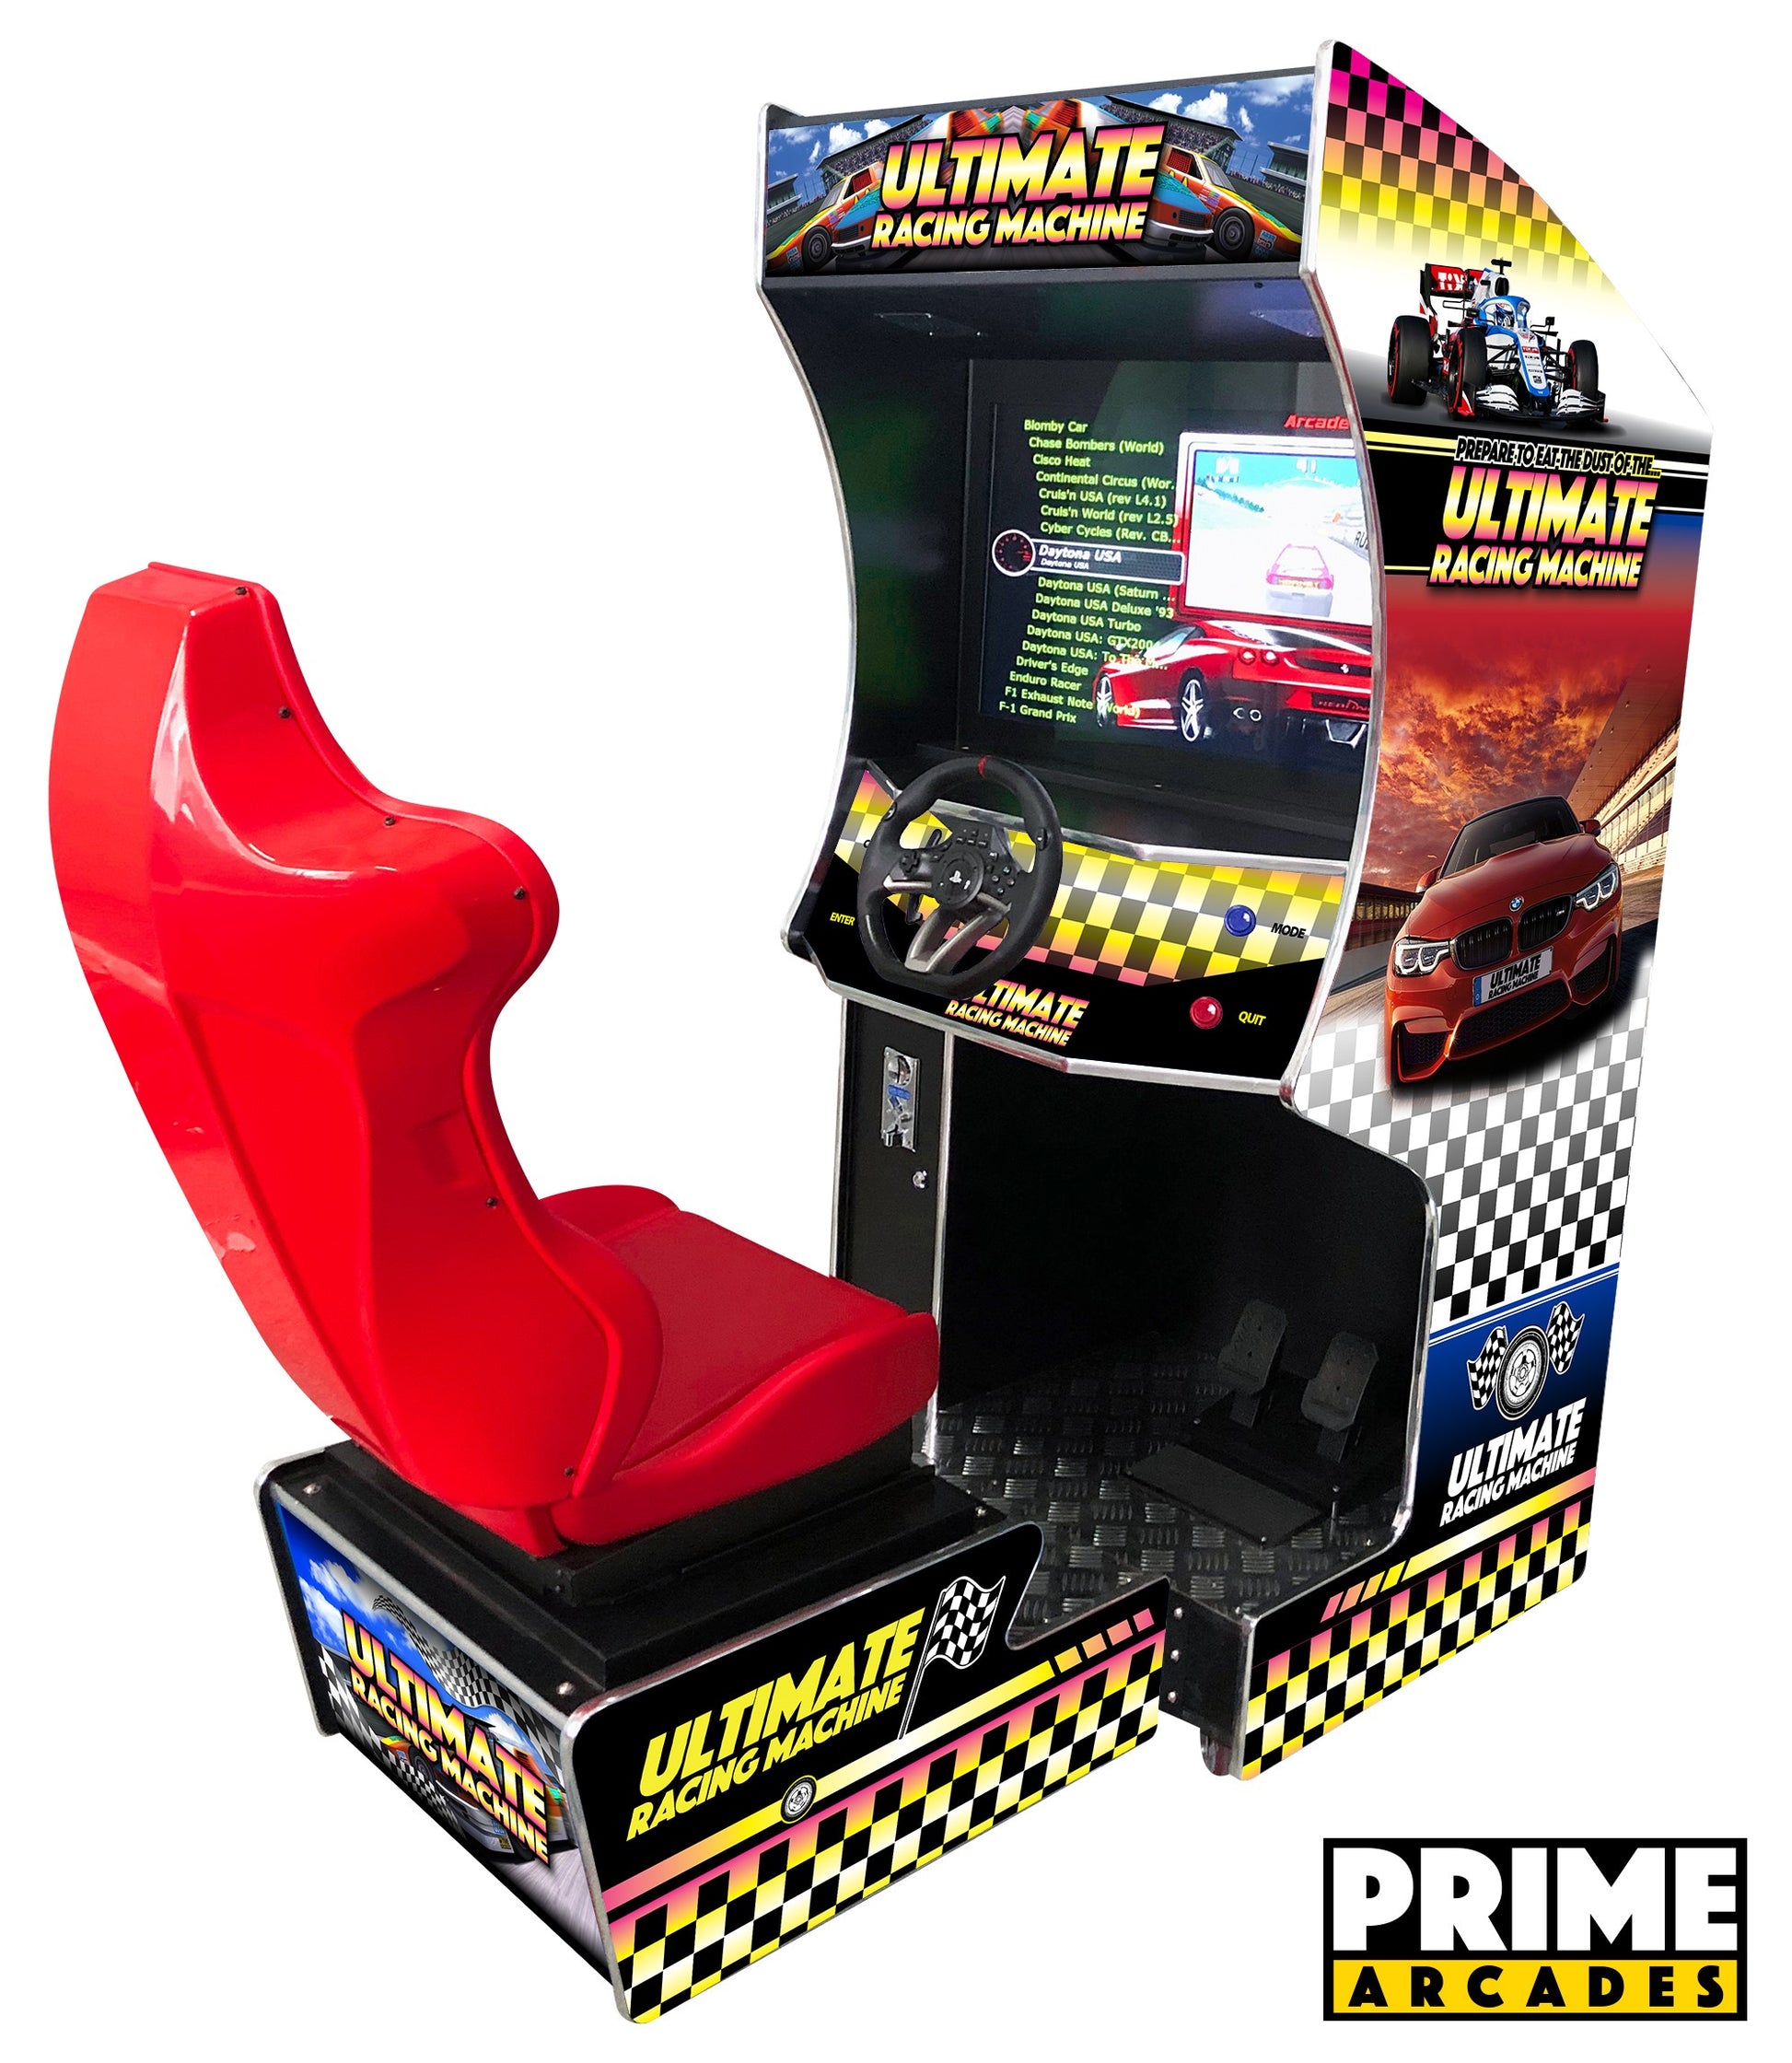 107 Racing Games in 1 Arcade Machine with Seat - Prime Arcades Inc